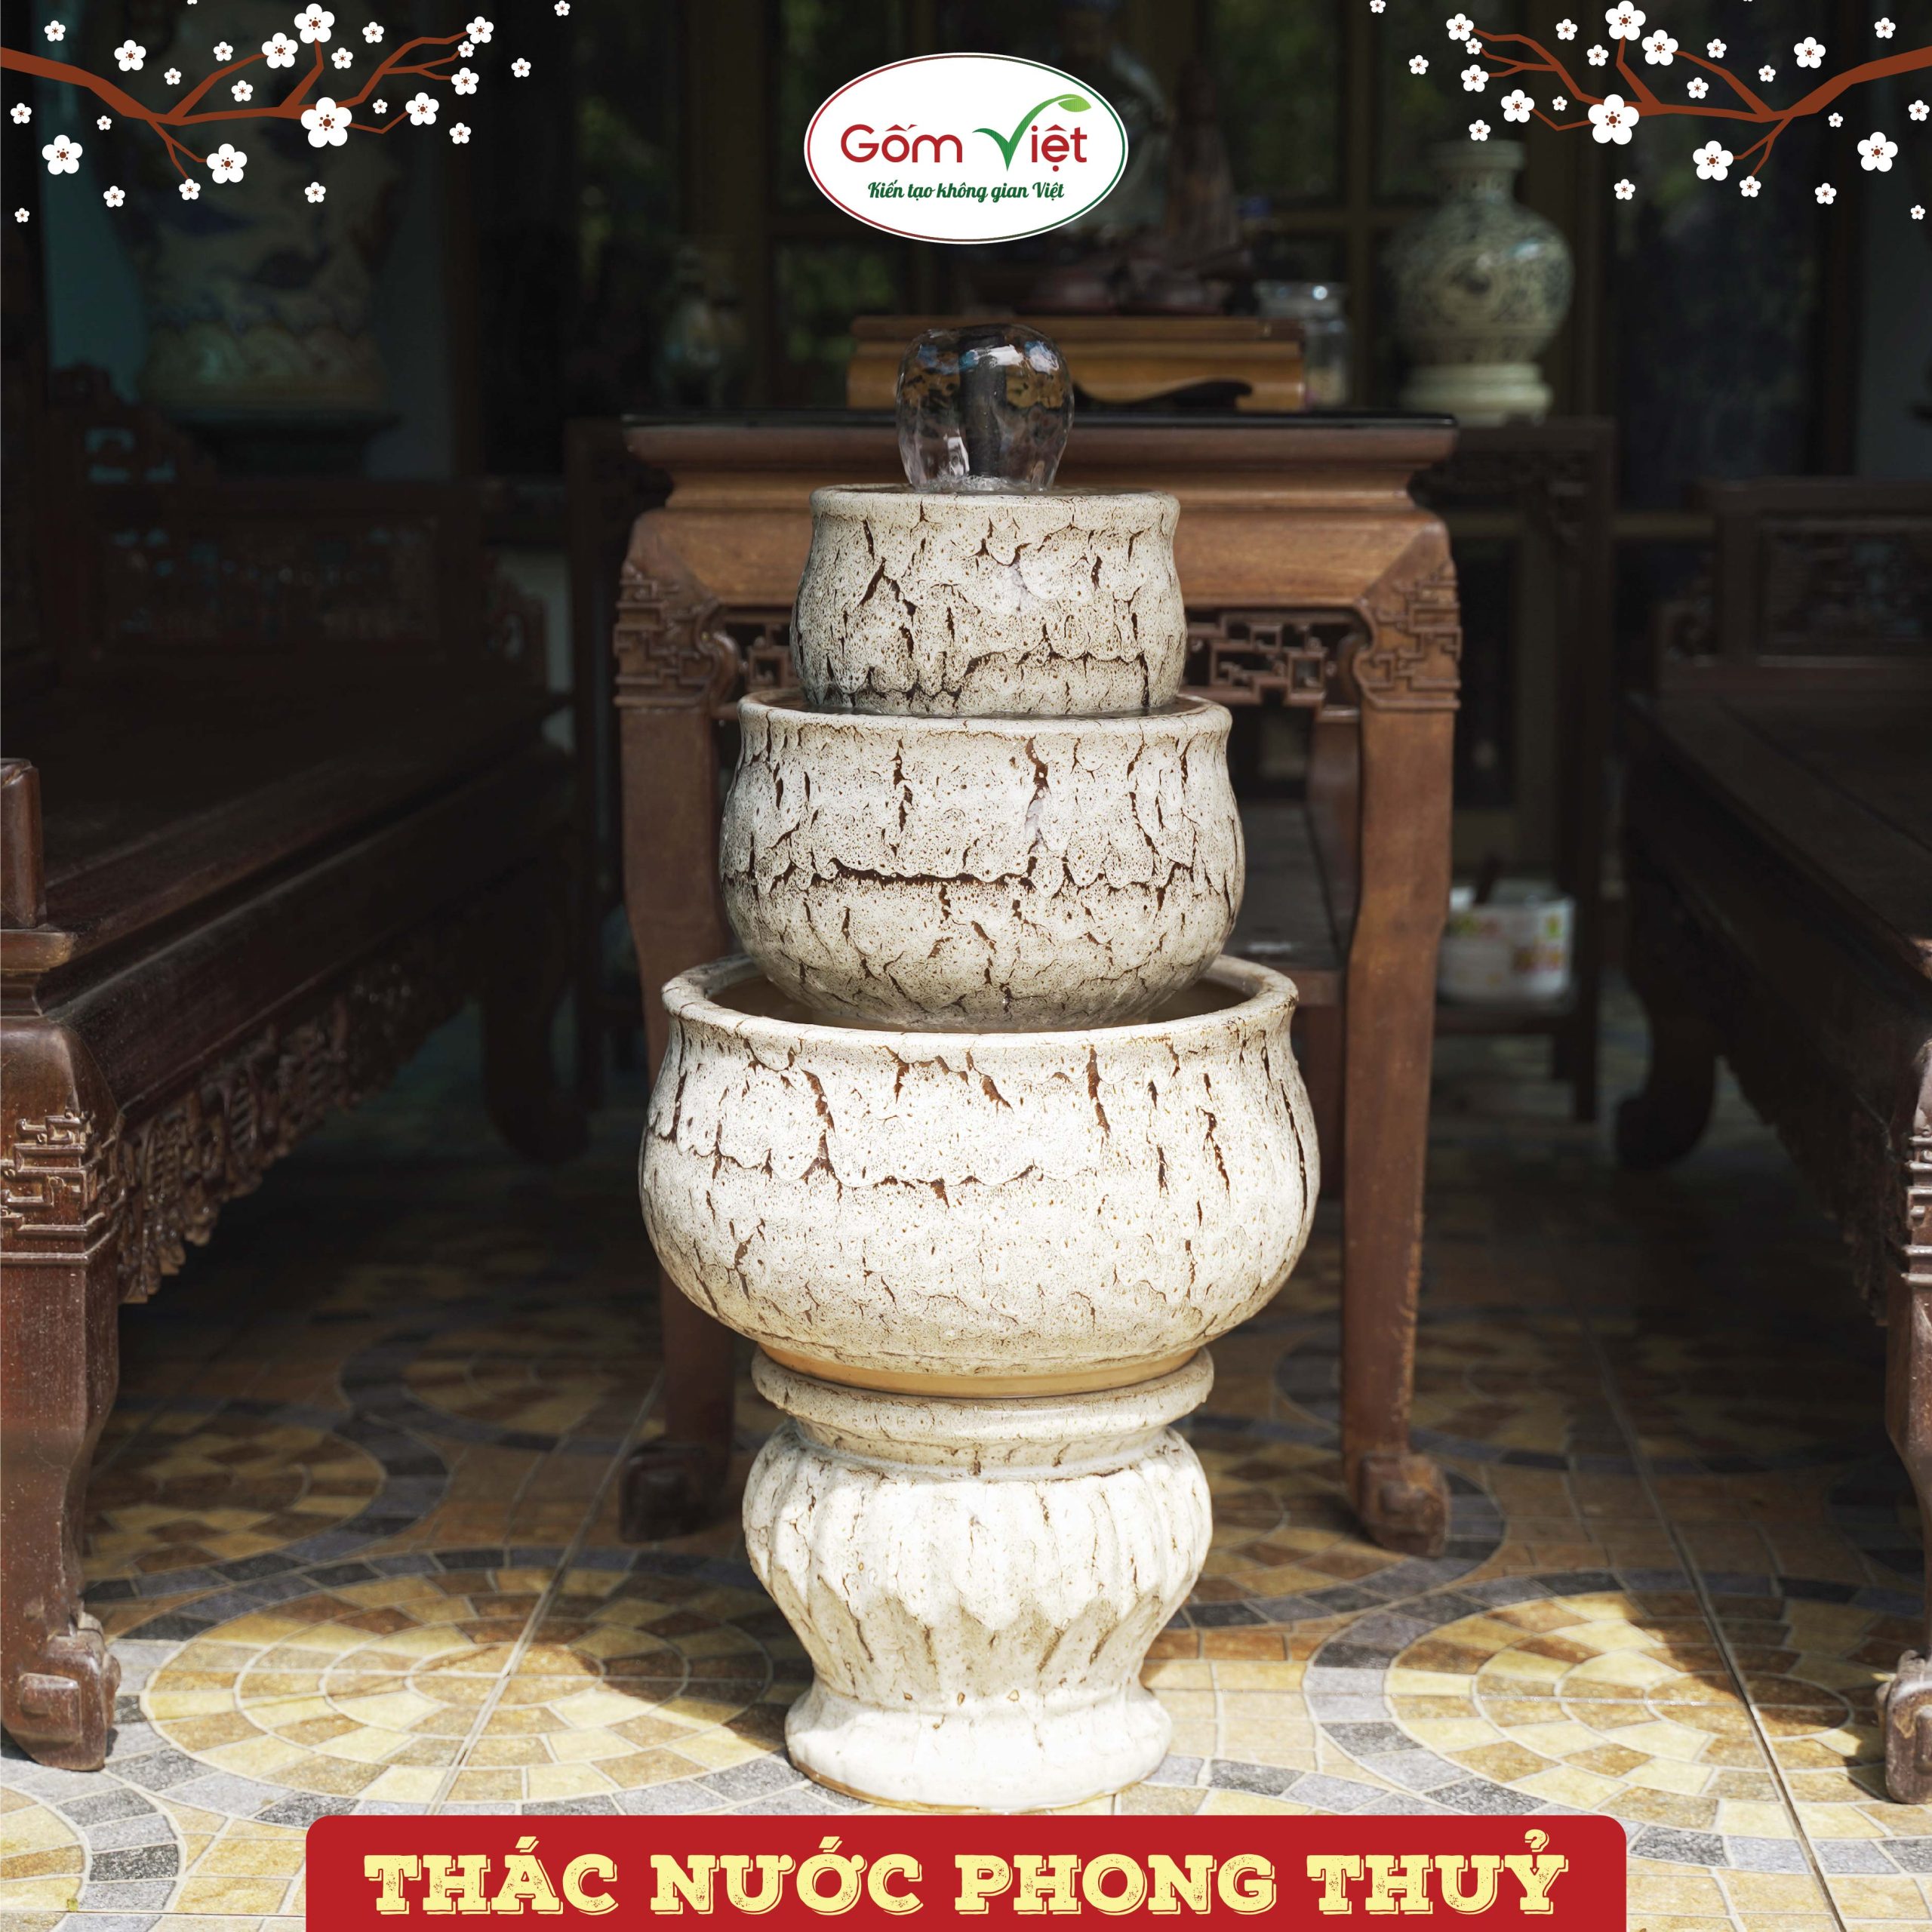 Thac-nuoc-phong-thuy